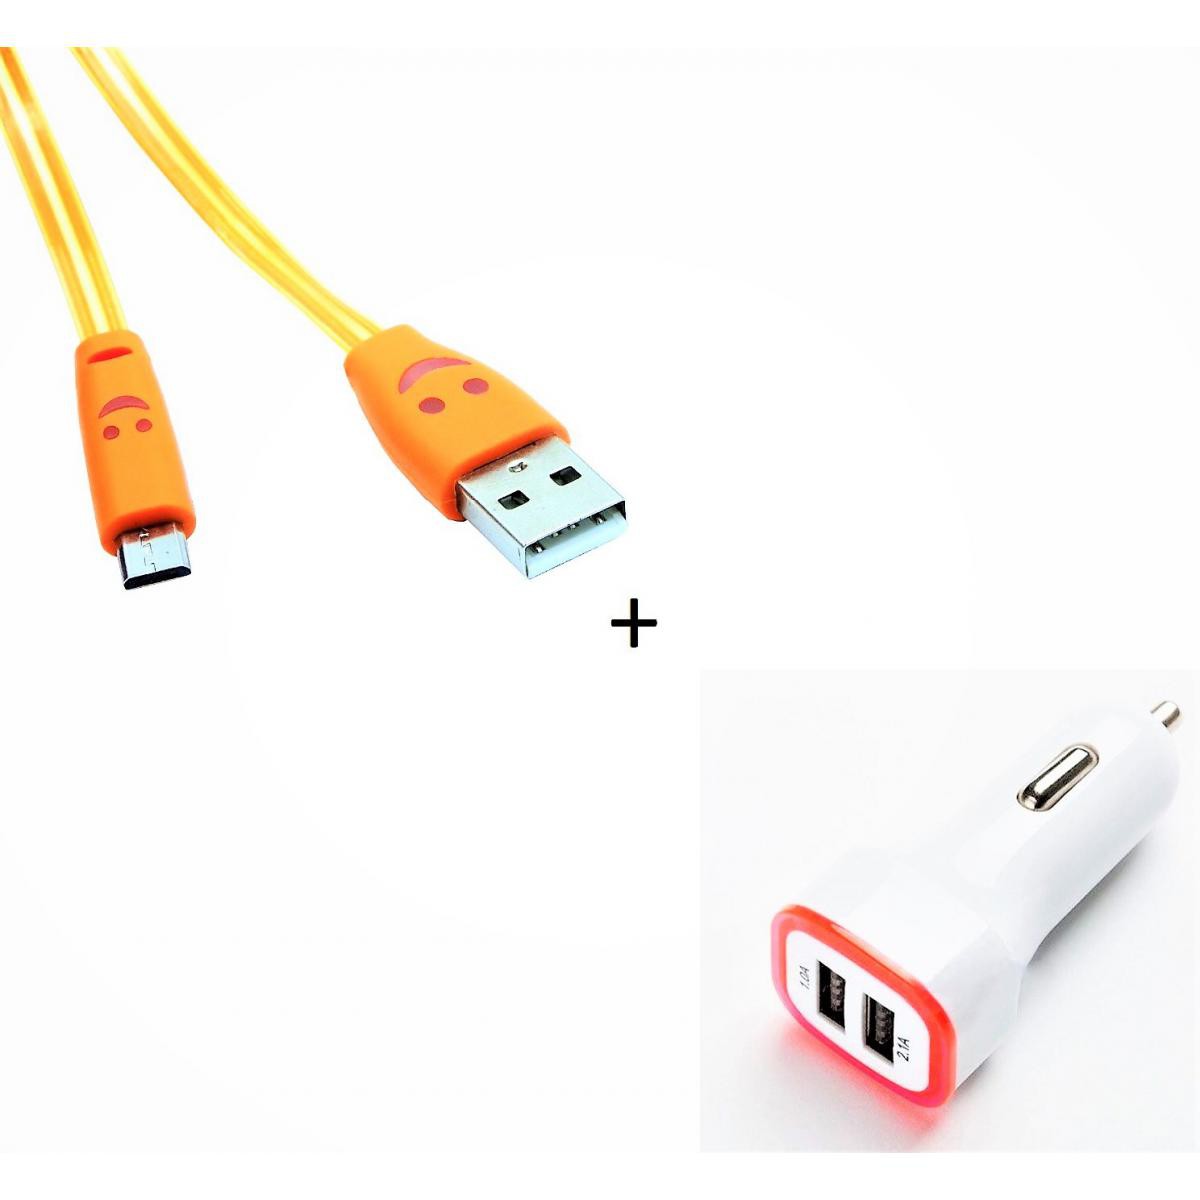 Shot - Pack Chargeur Voiture pour GIONEE F9 PLUS Smartphone Micro USB (Cable Smiley + Double Adaptateur LED Allume Cigare) (ORANGE) - Chargeur Voiture 12V